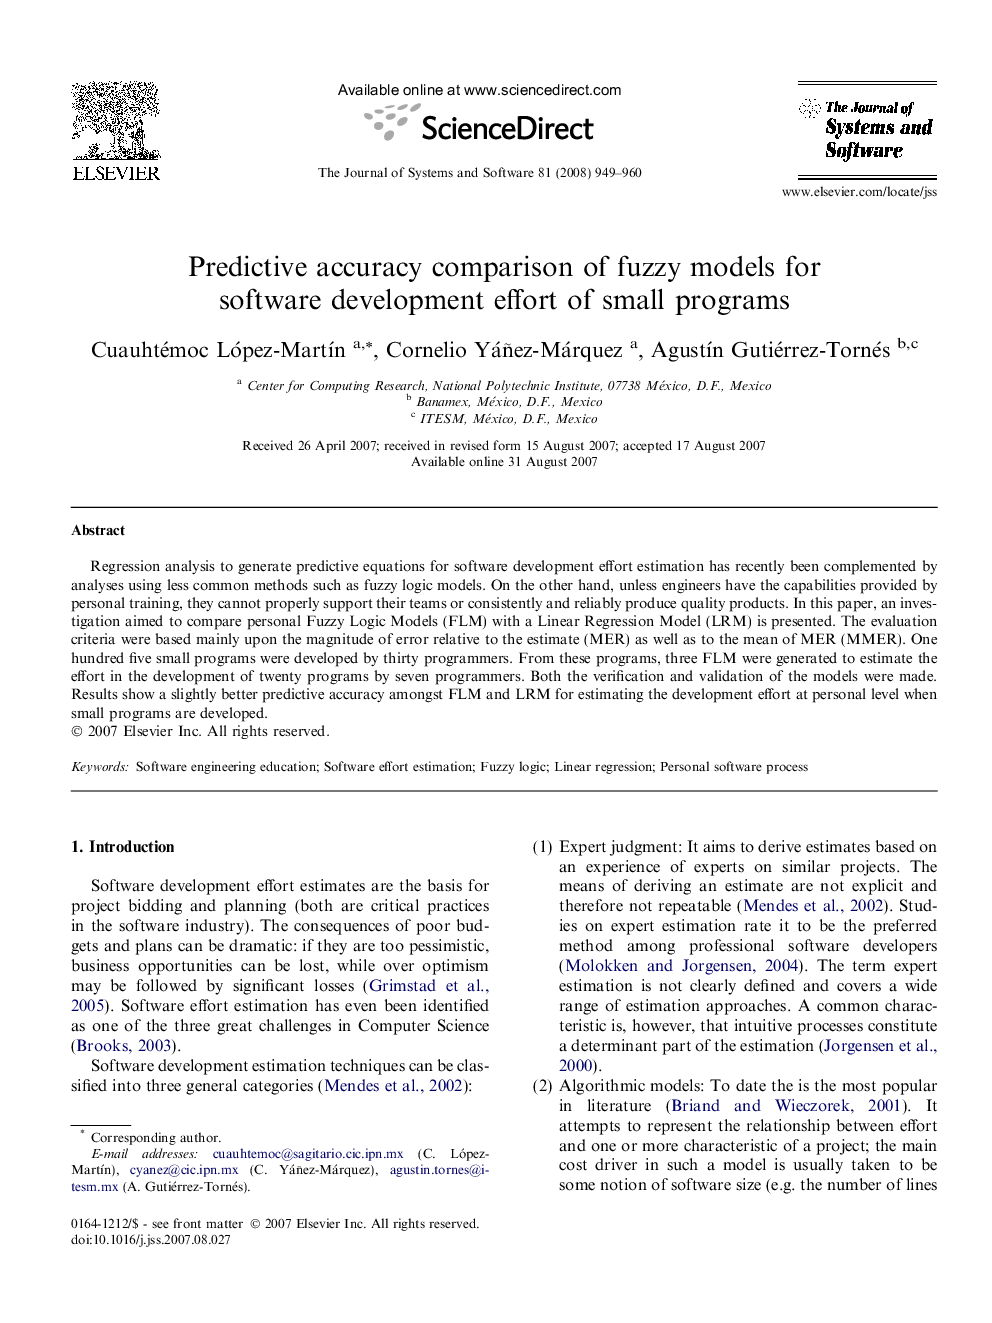 Predictive accuracy comparison of fuzzy models for software development effort of small programs